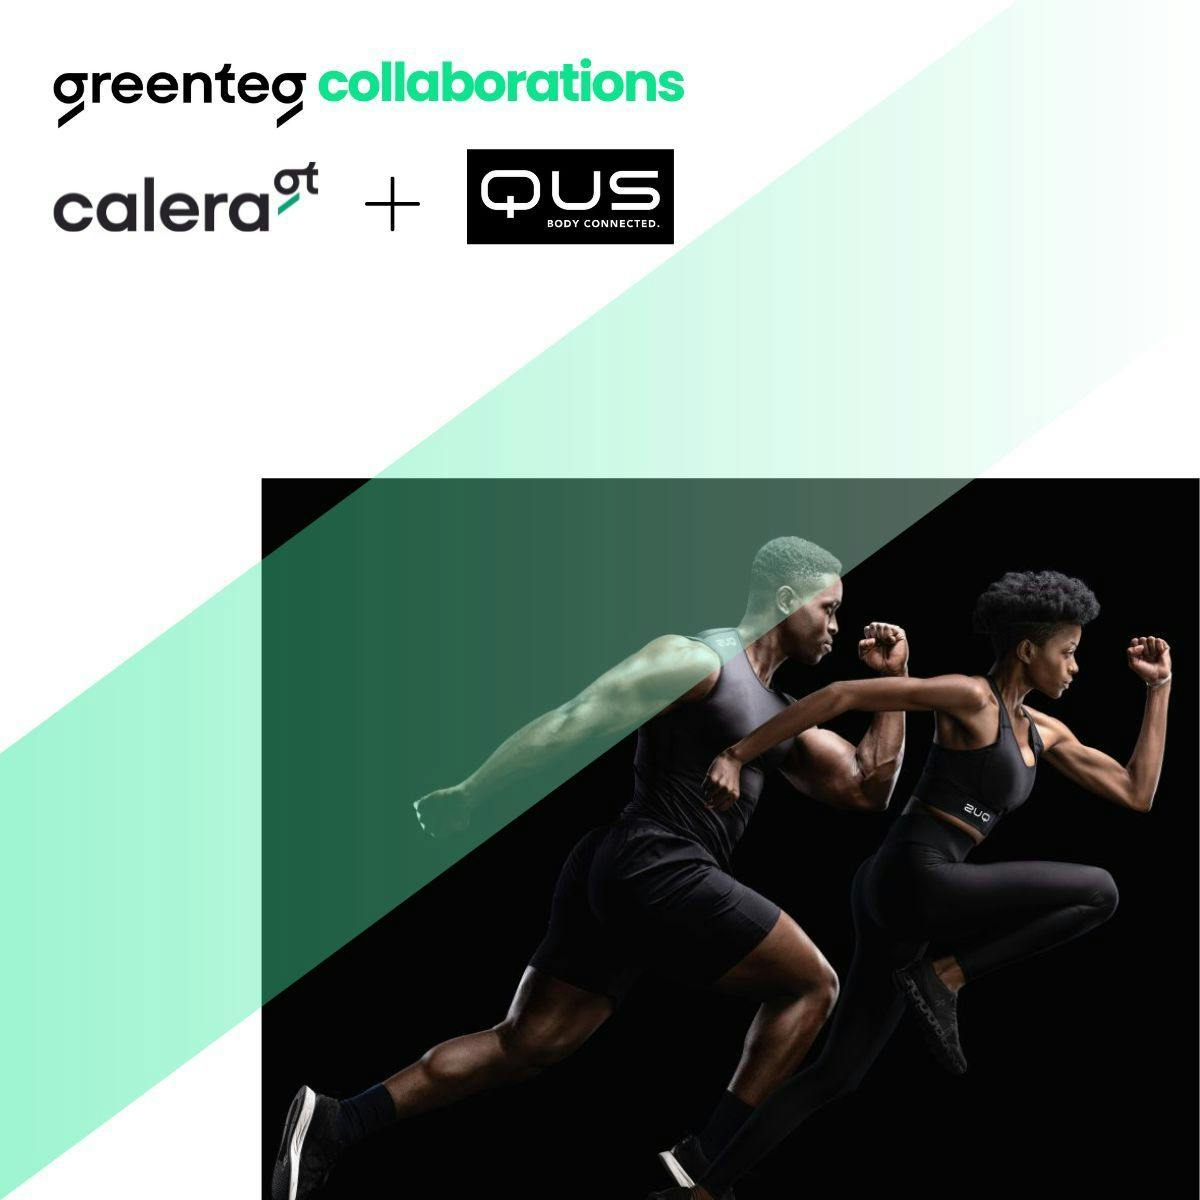  greenteg and QUS combined innovative technologies takes body data monitoring to the next level